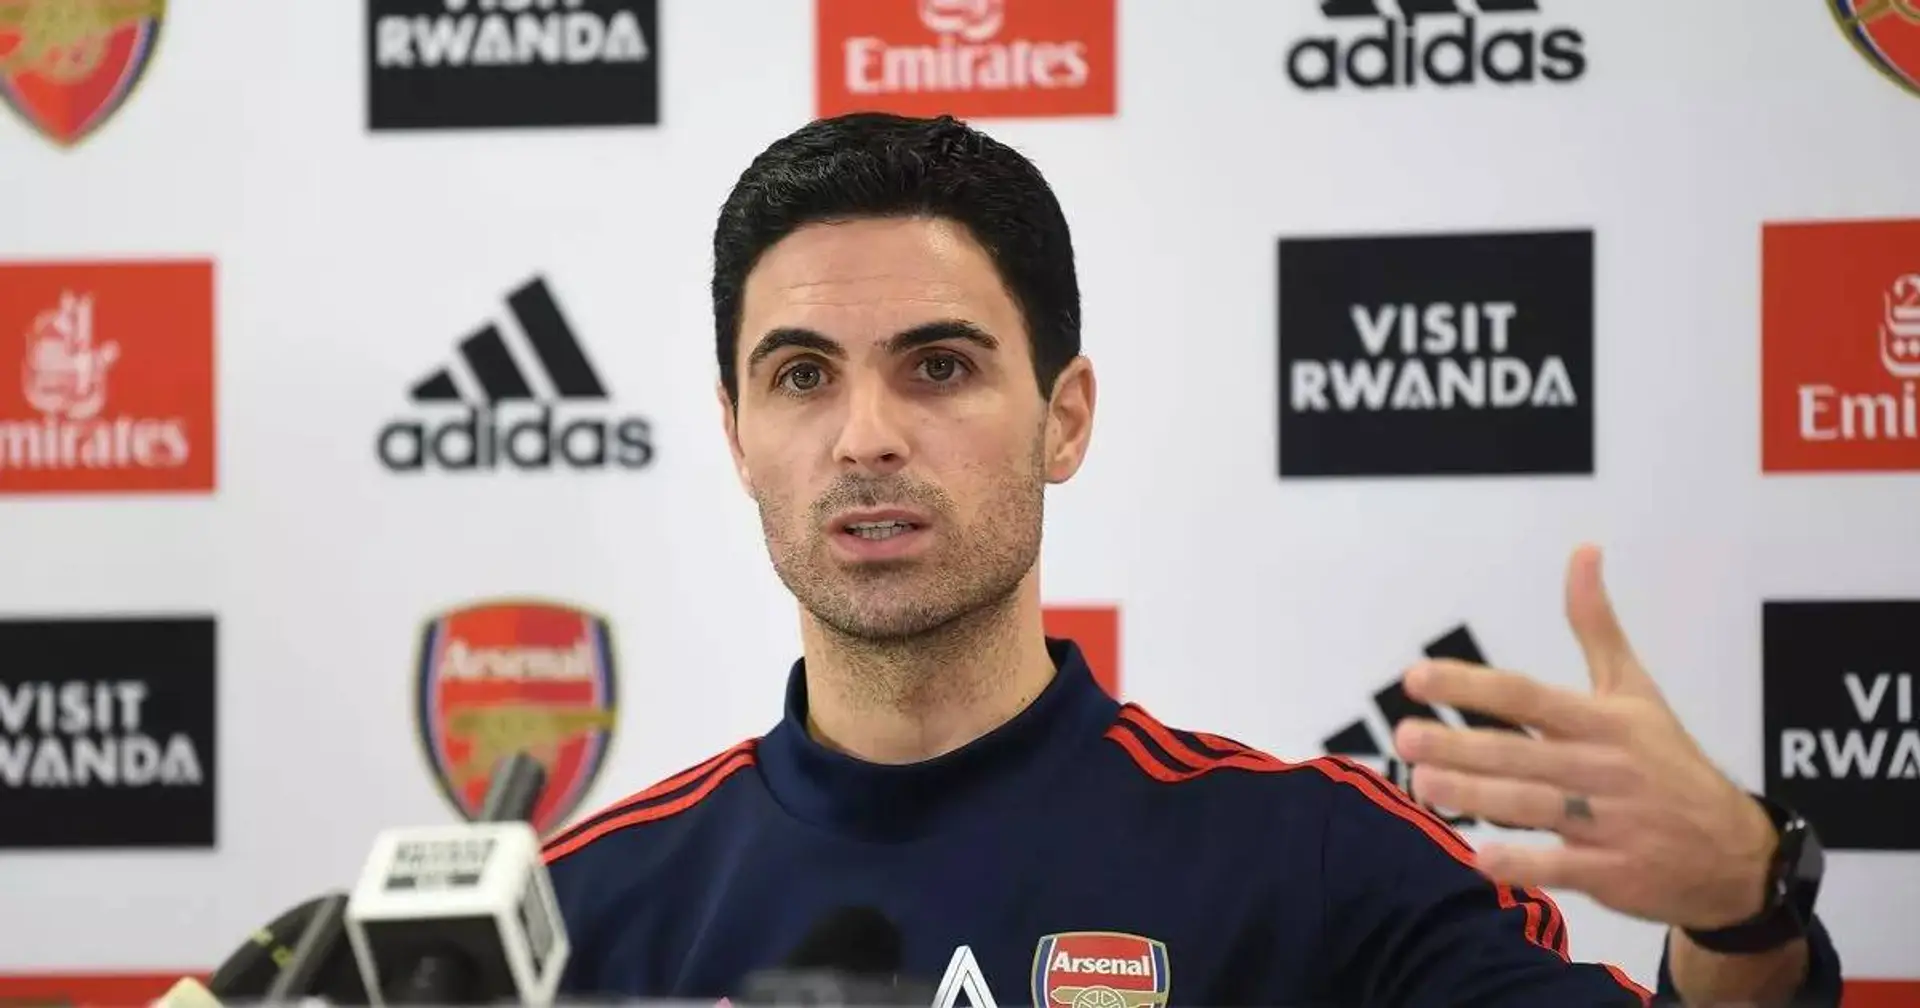 'Even if you are better, you don't win': Mikel Arteta insists Arsenal are lucky despite back-to-back defeats